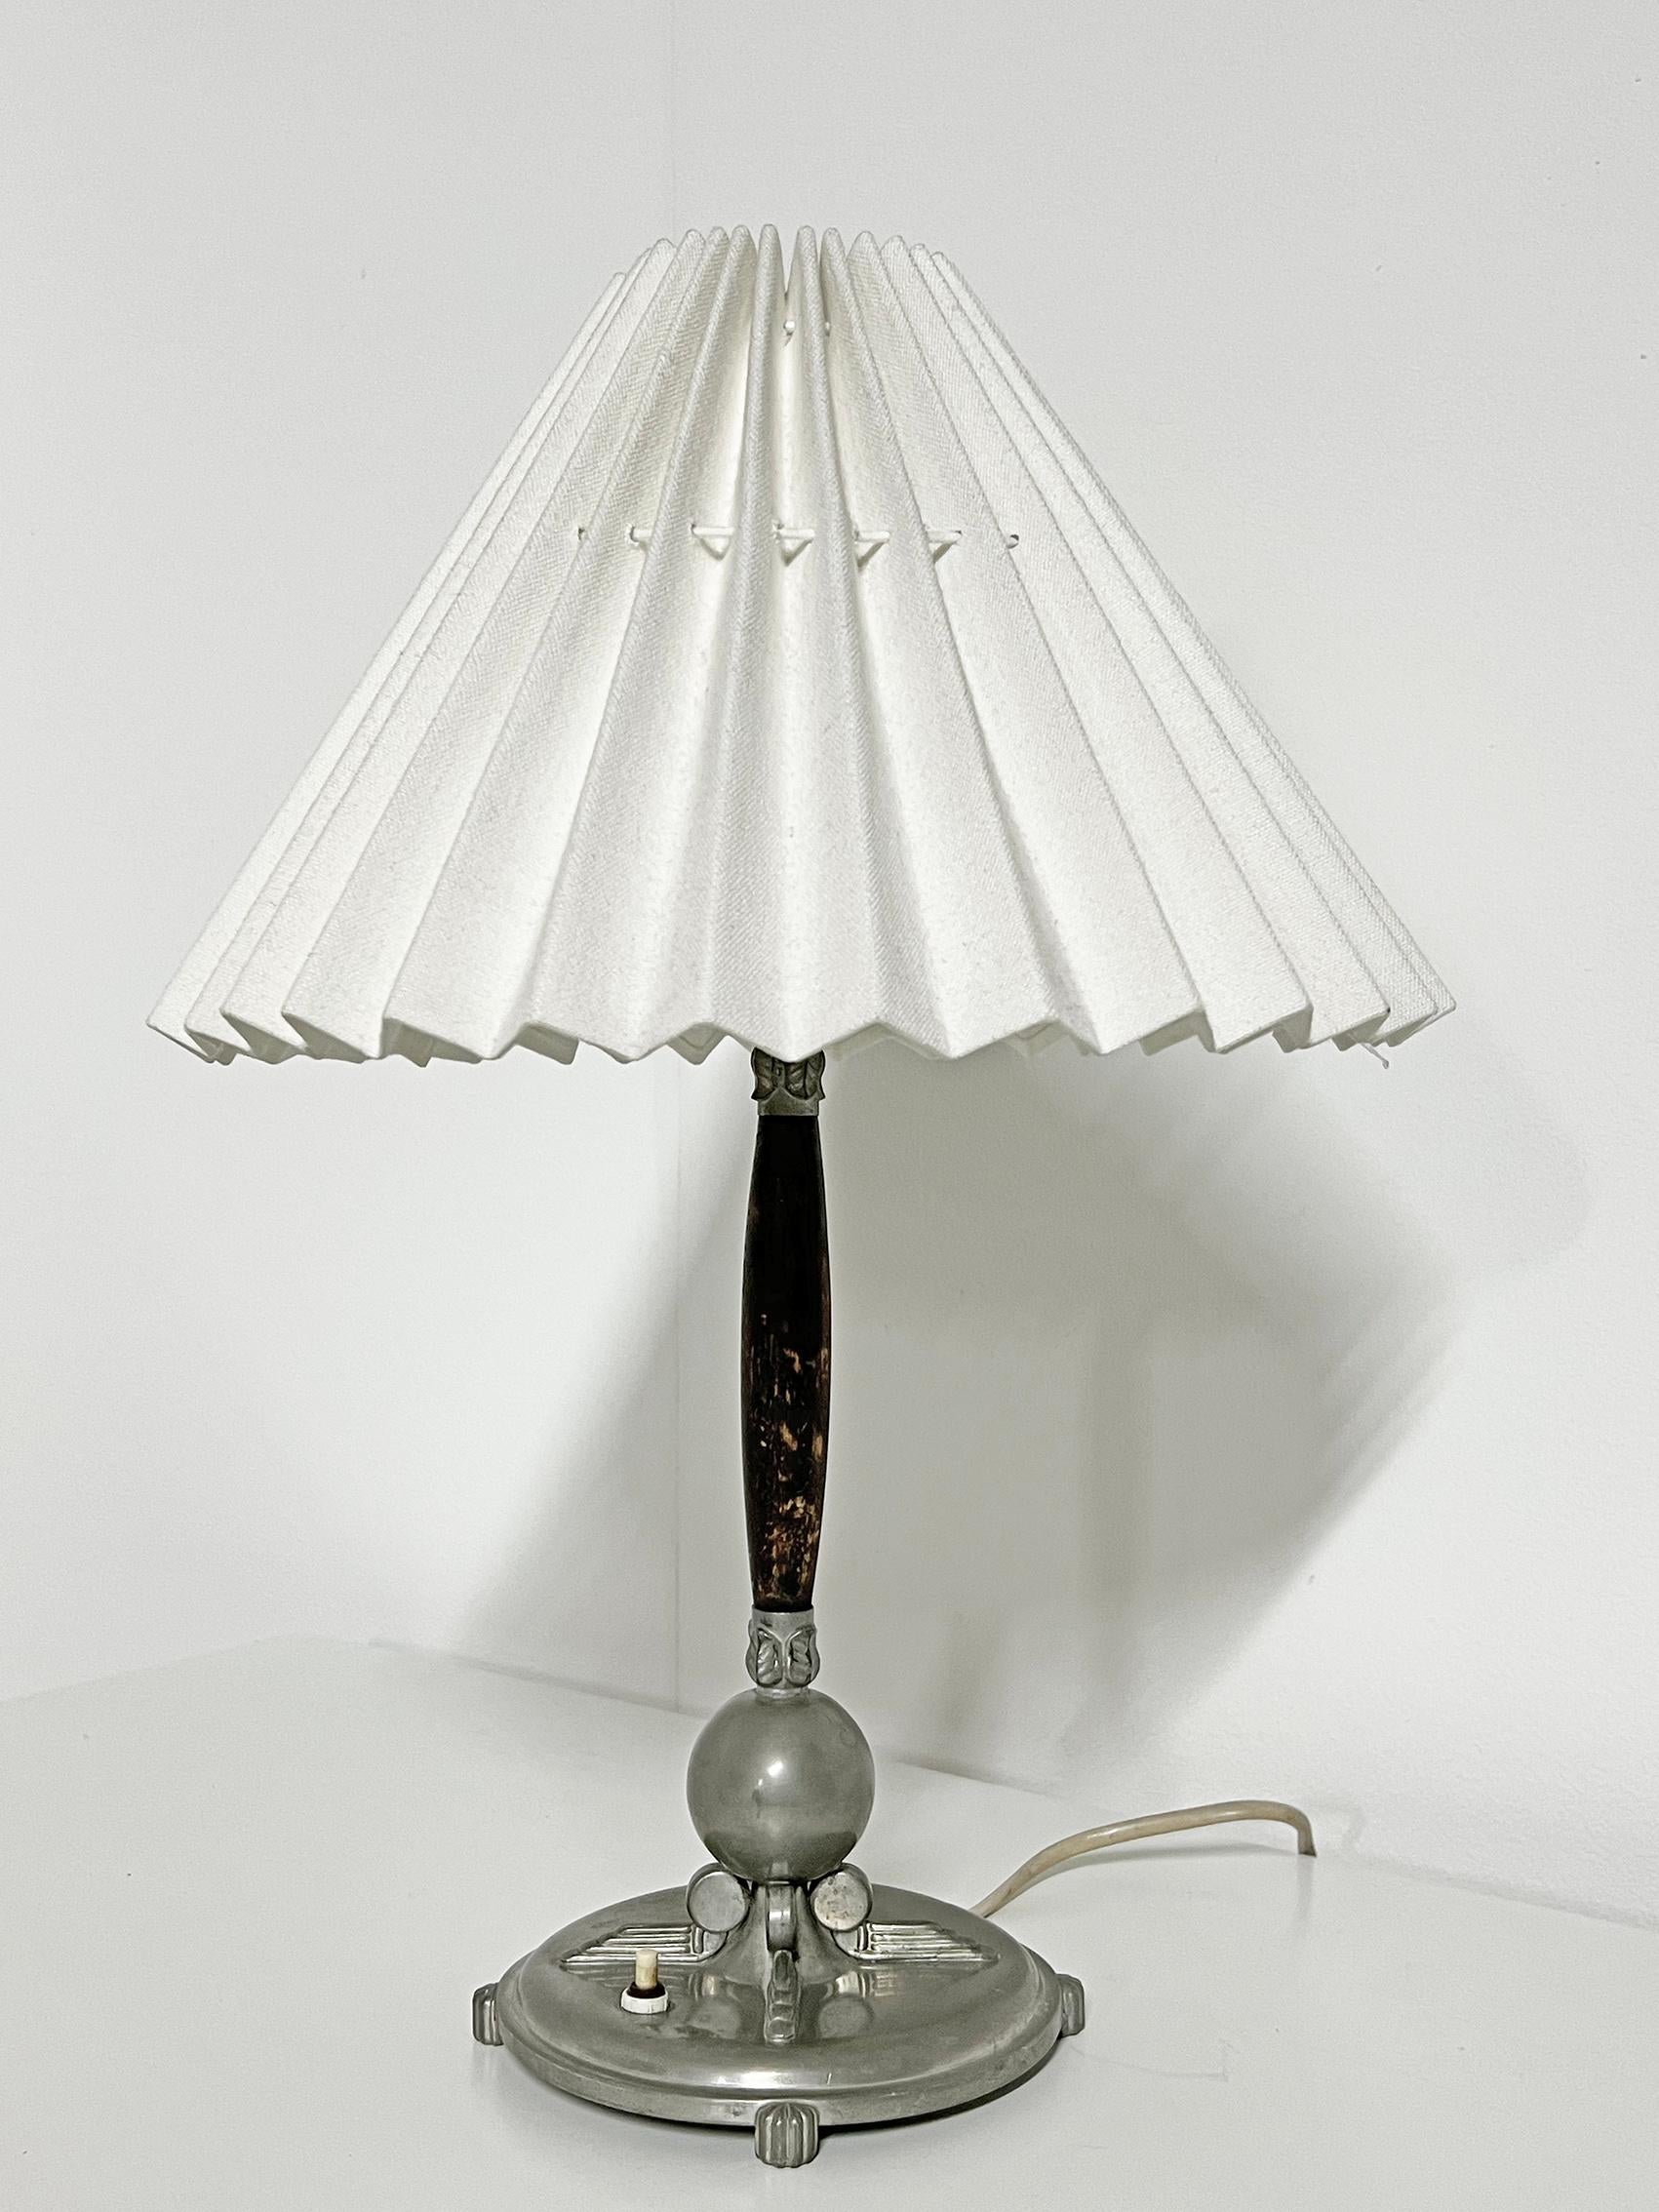 Amazing table lamp with beautiful art deco details, in pewter and stained wood, Lundin & Lindberg -1938.
Signed with makers mark. 
Good vintage condition, wear and patina consistent with age and use.
Pewter patina, wear on wooden part, as seen on